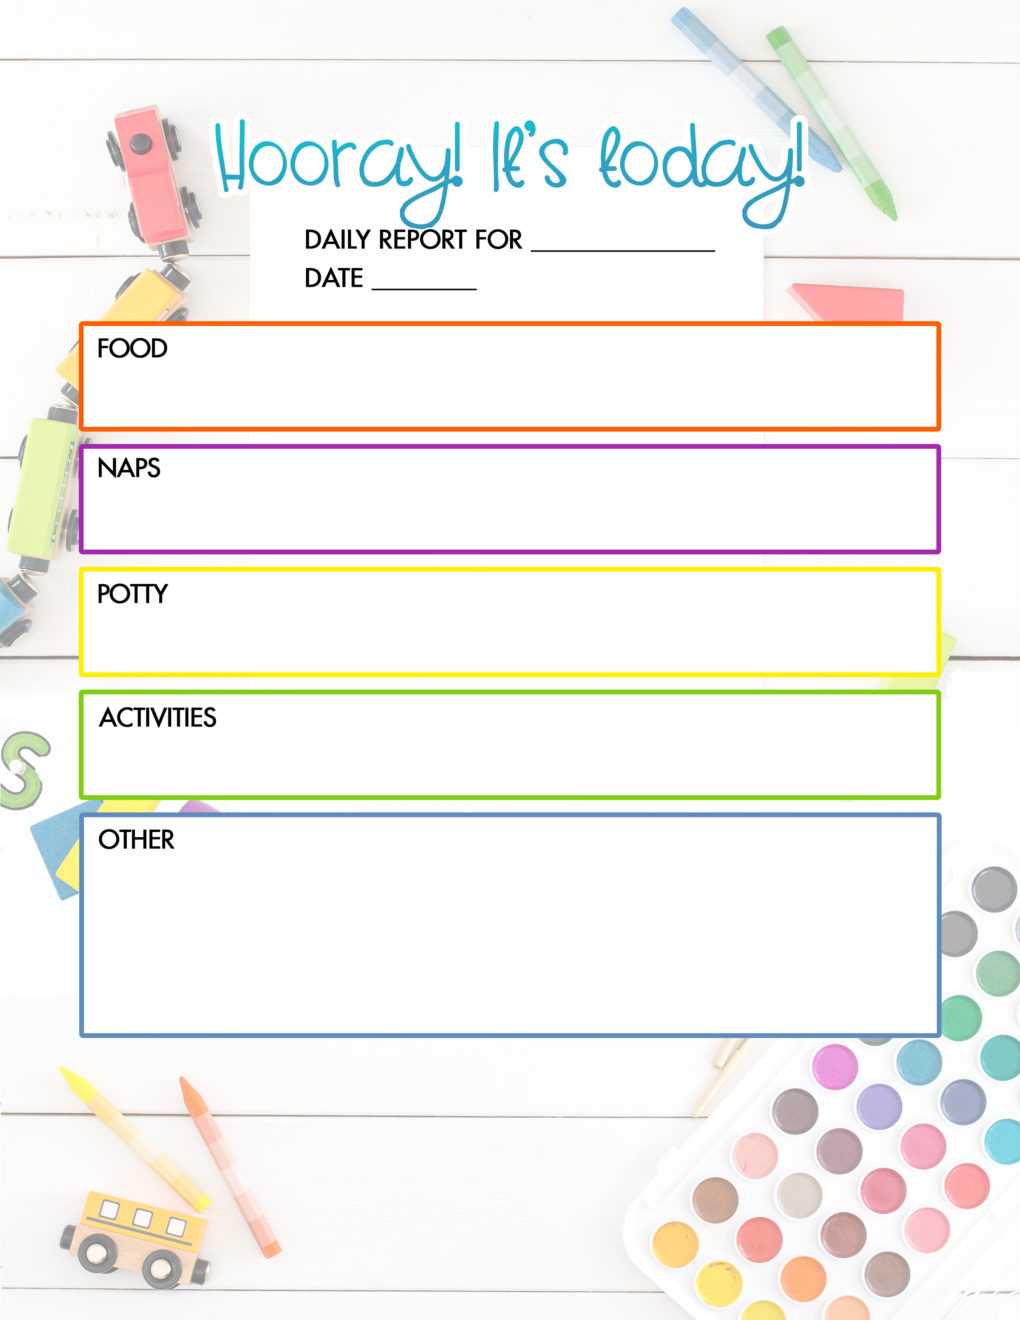 Free Daycare Daily Report | Child Care Printable – The Diy In Daycare Infant Daily Report Template